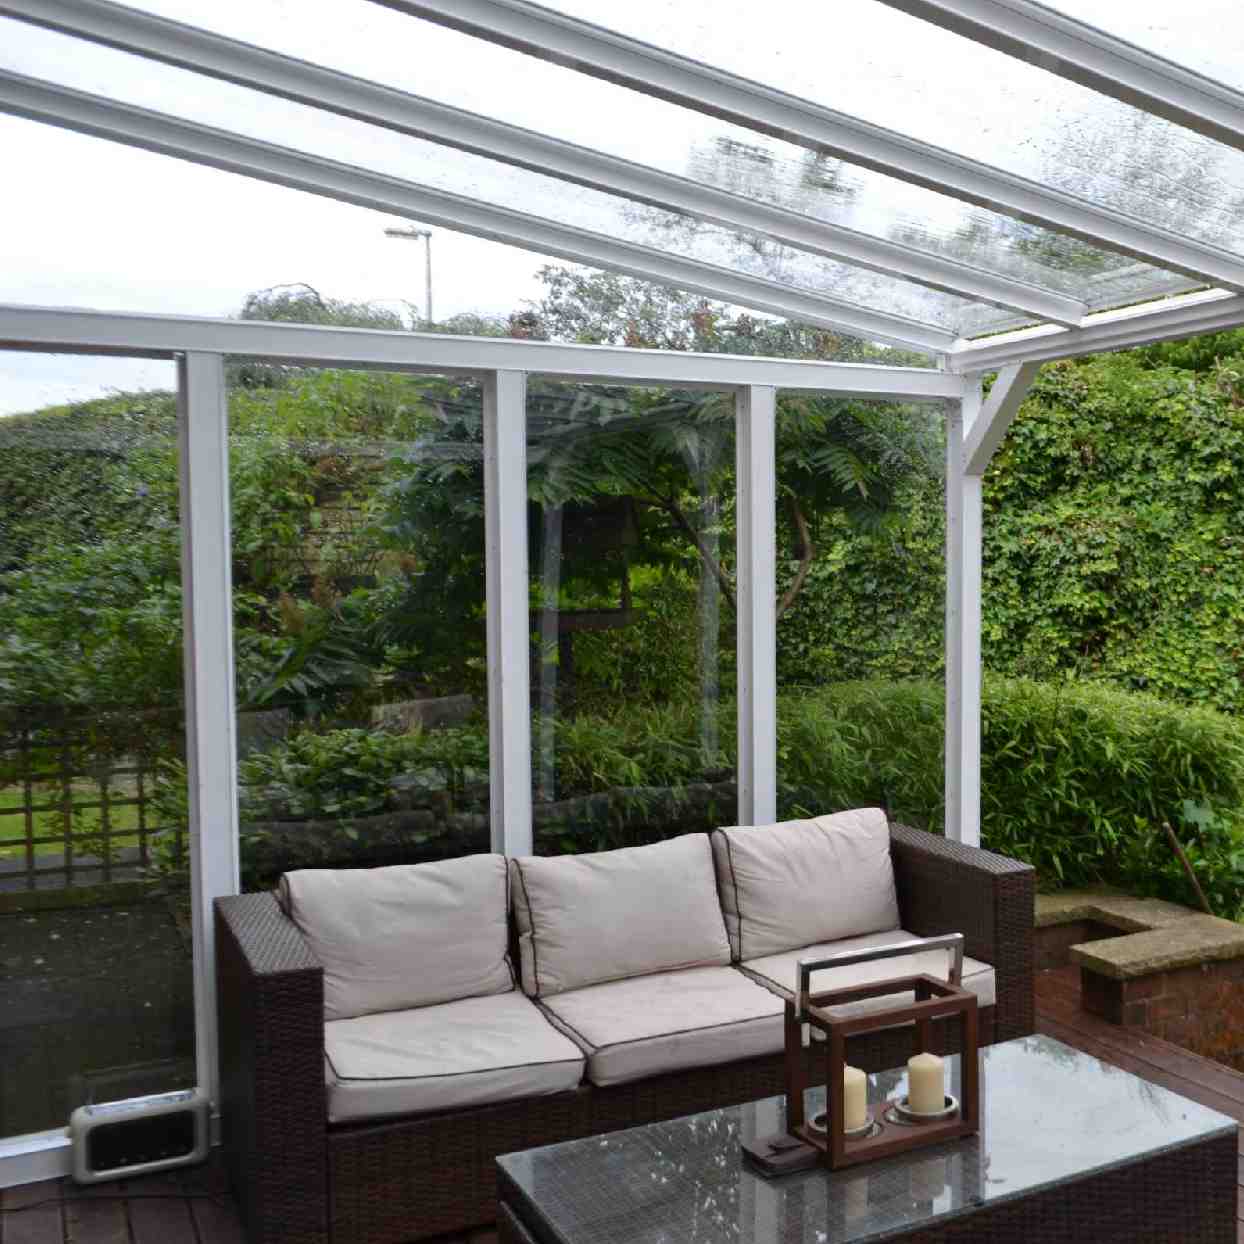 Buy Omega Verandah White with 6mm Glass Clear Plate Polycarbonate Glazing - 5.6m (W) x 2.0m (P), (3) Supporting Posts online today